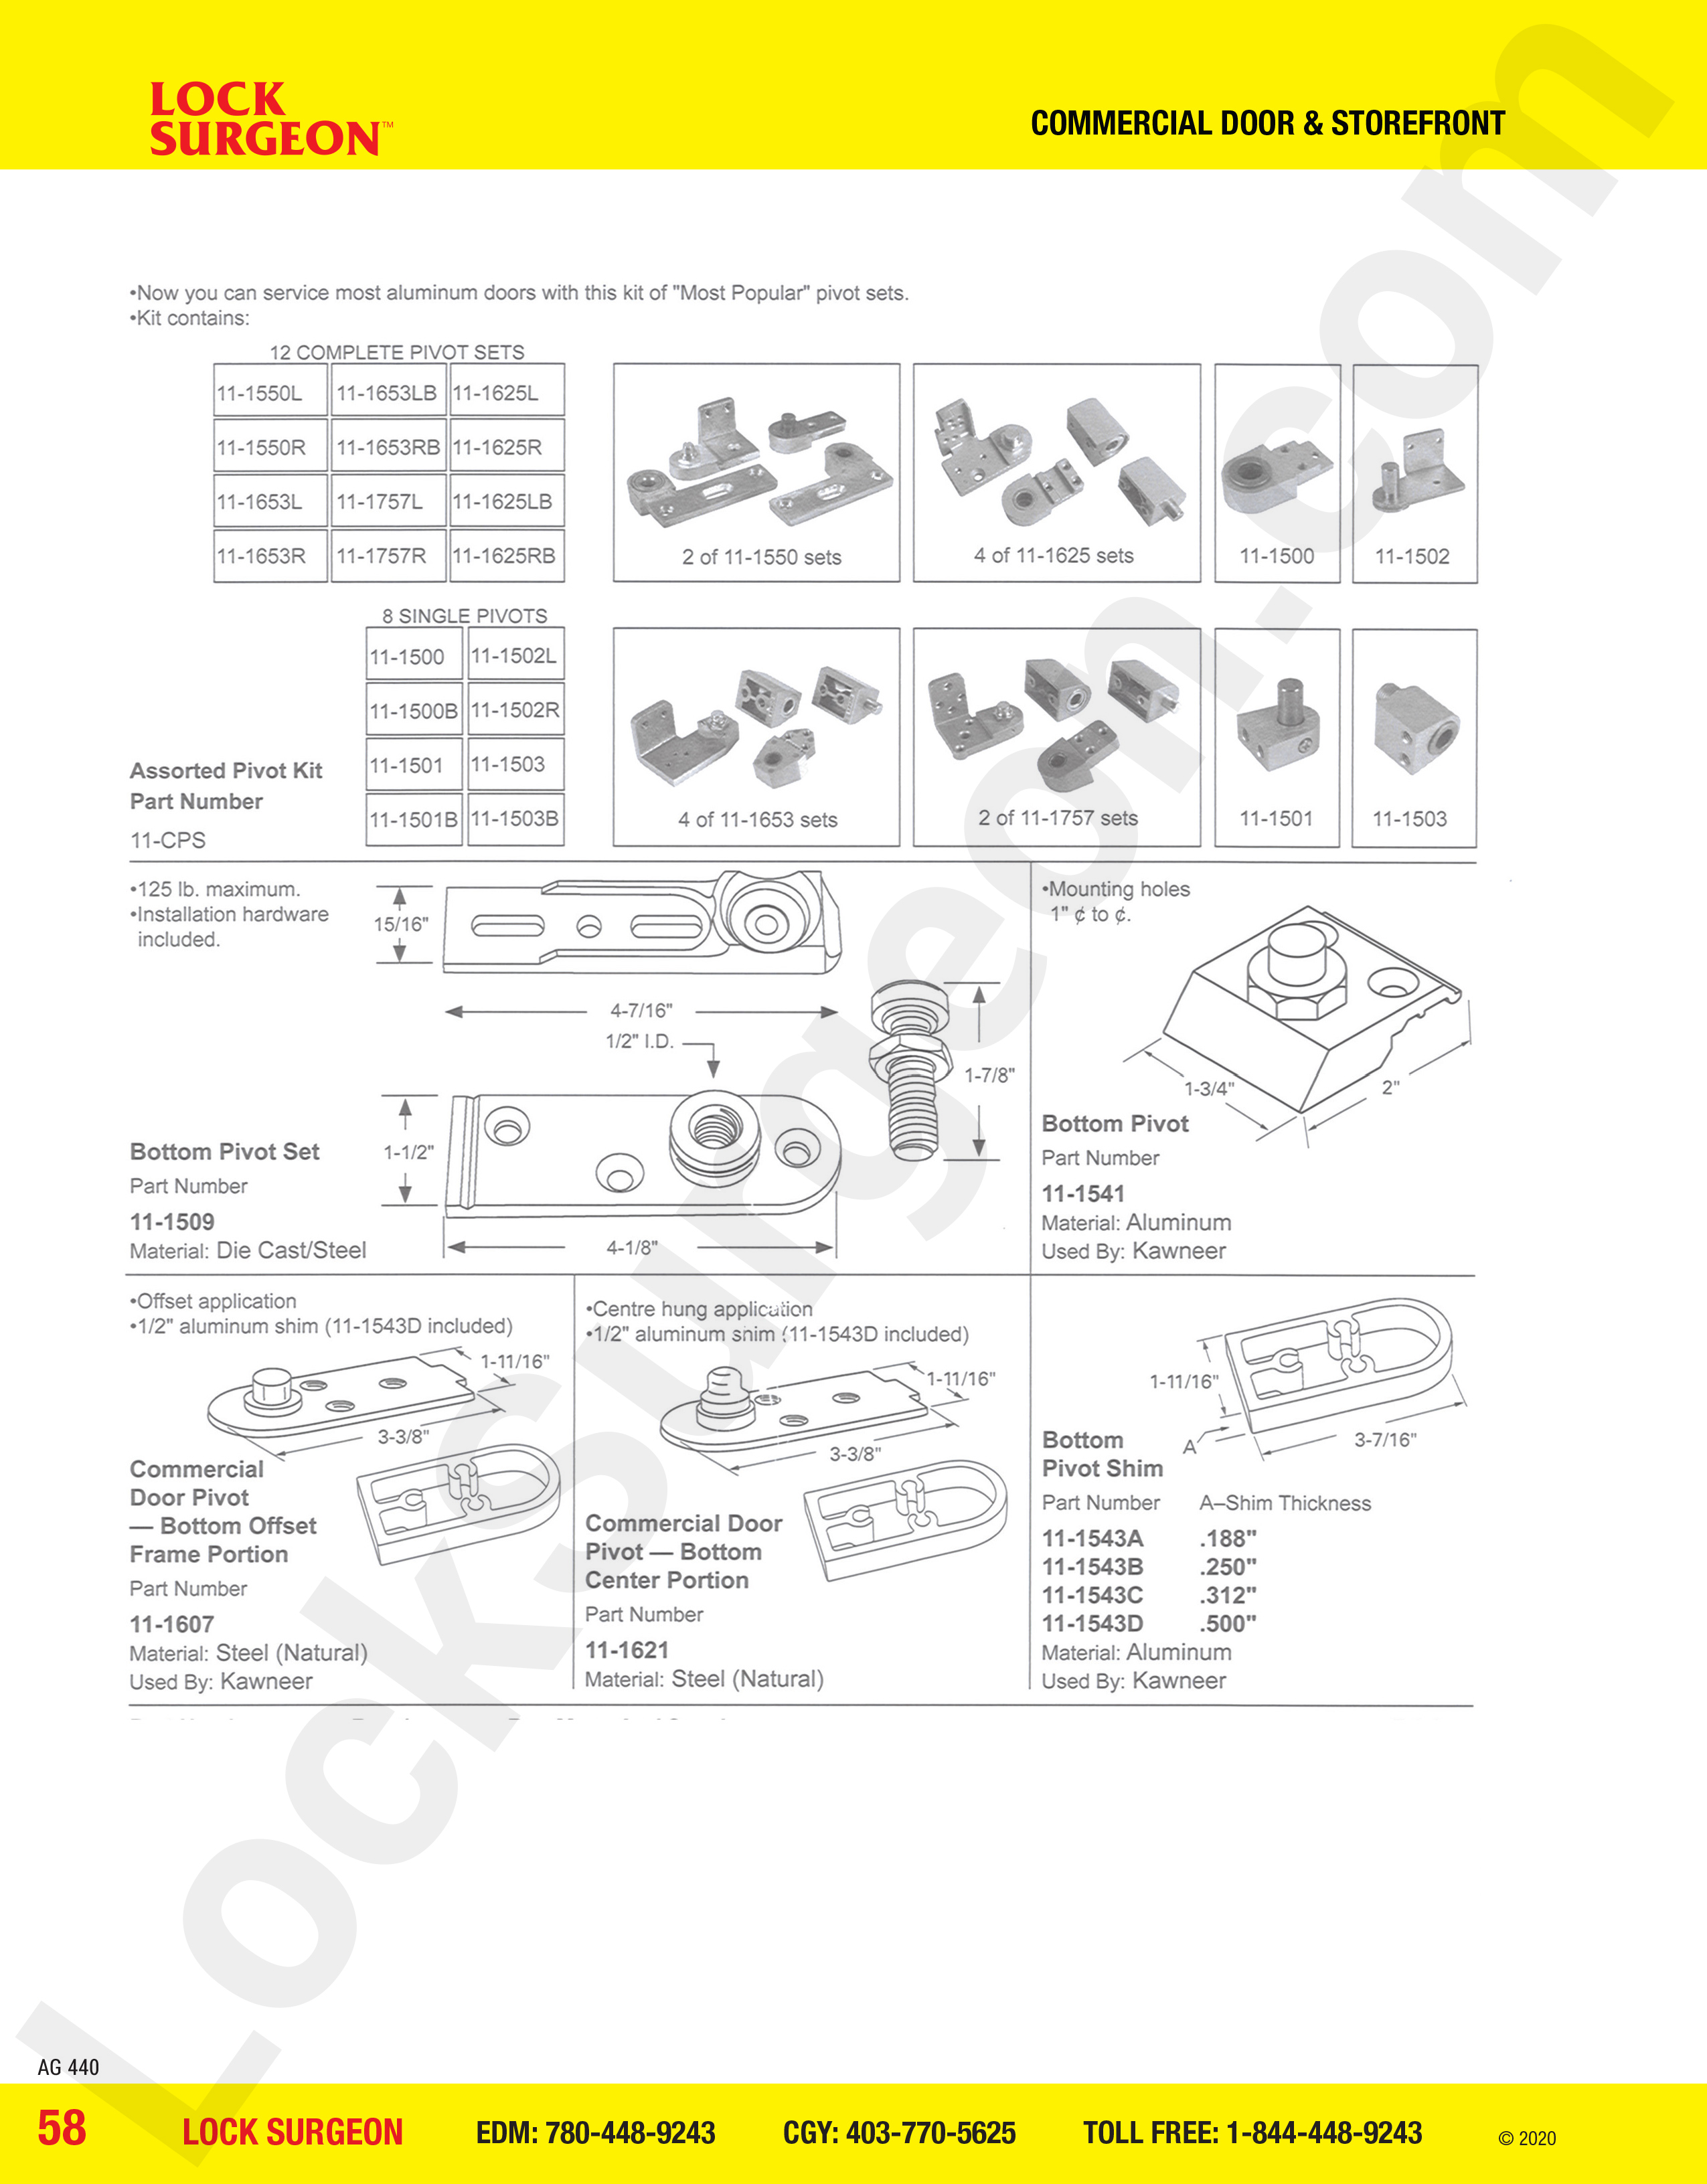 Commercial Door and Storefront parts for assorted pivot kits